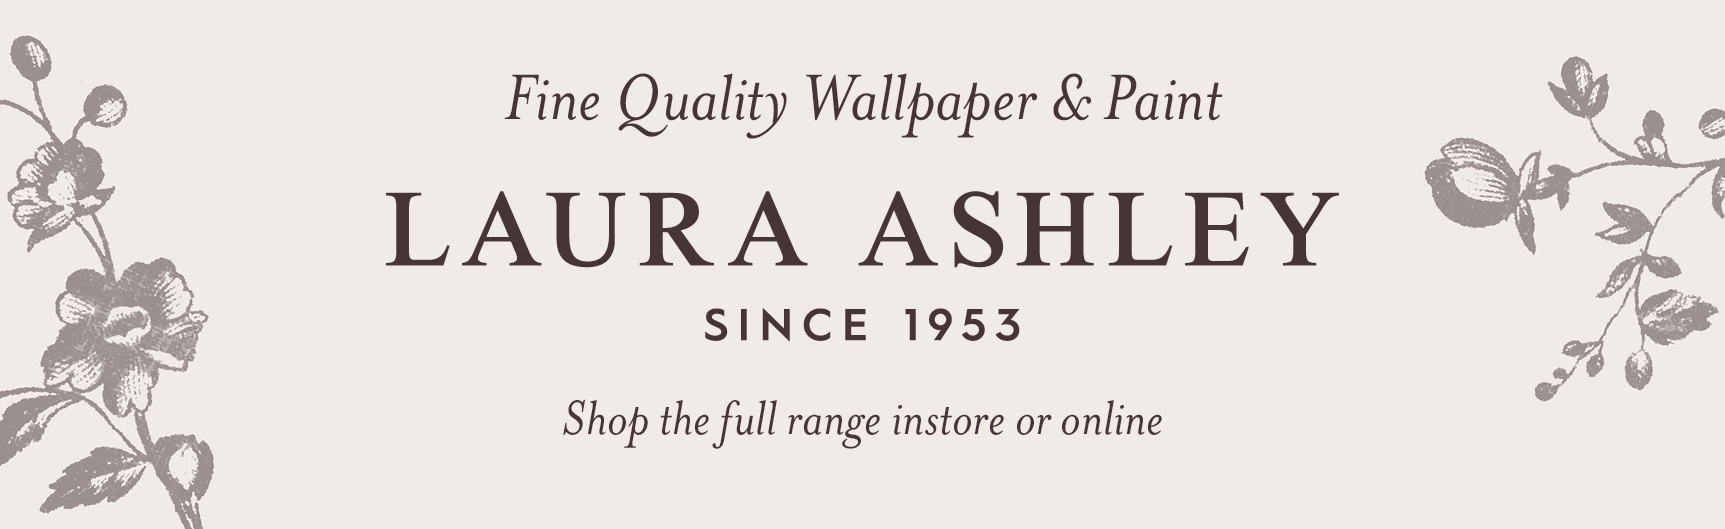 Fine quality Wallpaper & paint - Laura Ashley Since 1953 - Ship the full range instore or online